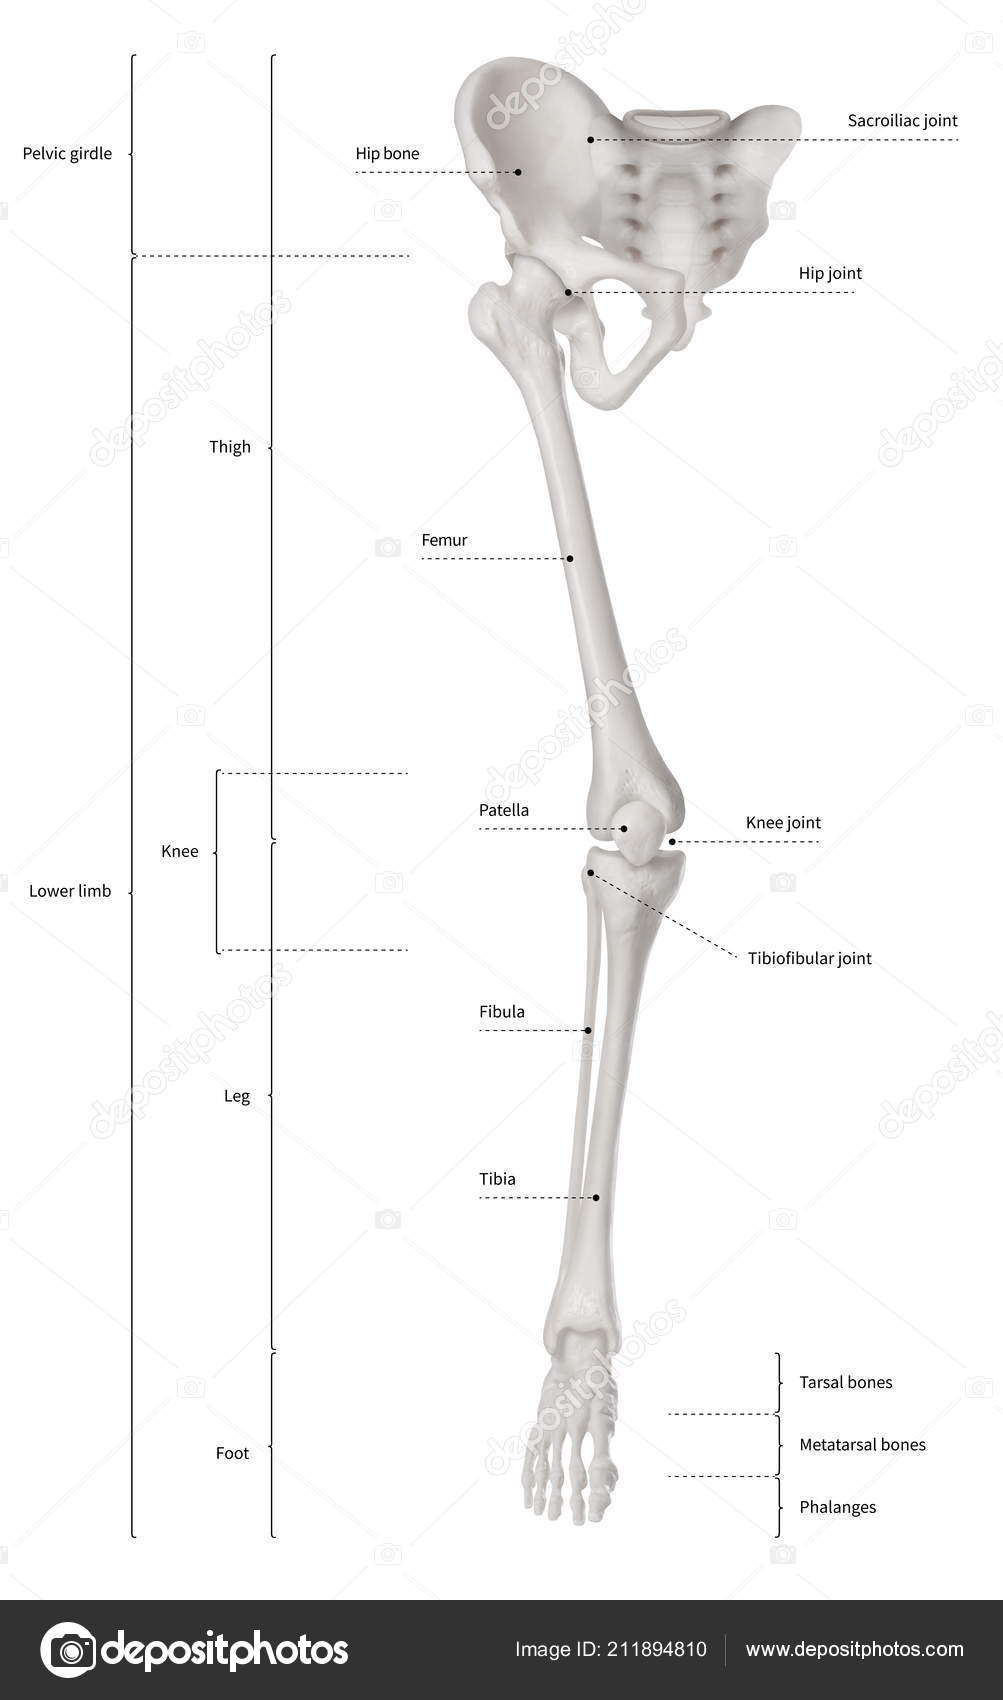 Medical Anatomical Human Lower Limb Skeleton Model Life Size Includes All Leg Bones Plus Removable Hip Joint 